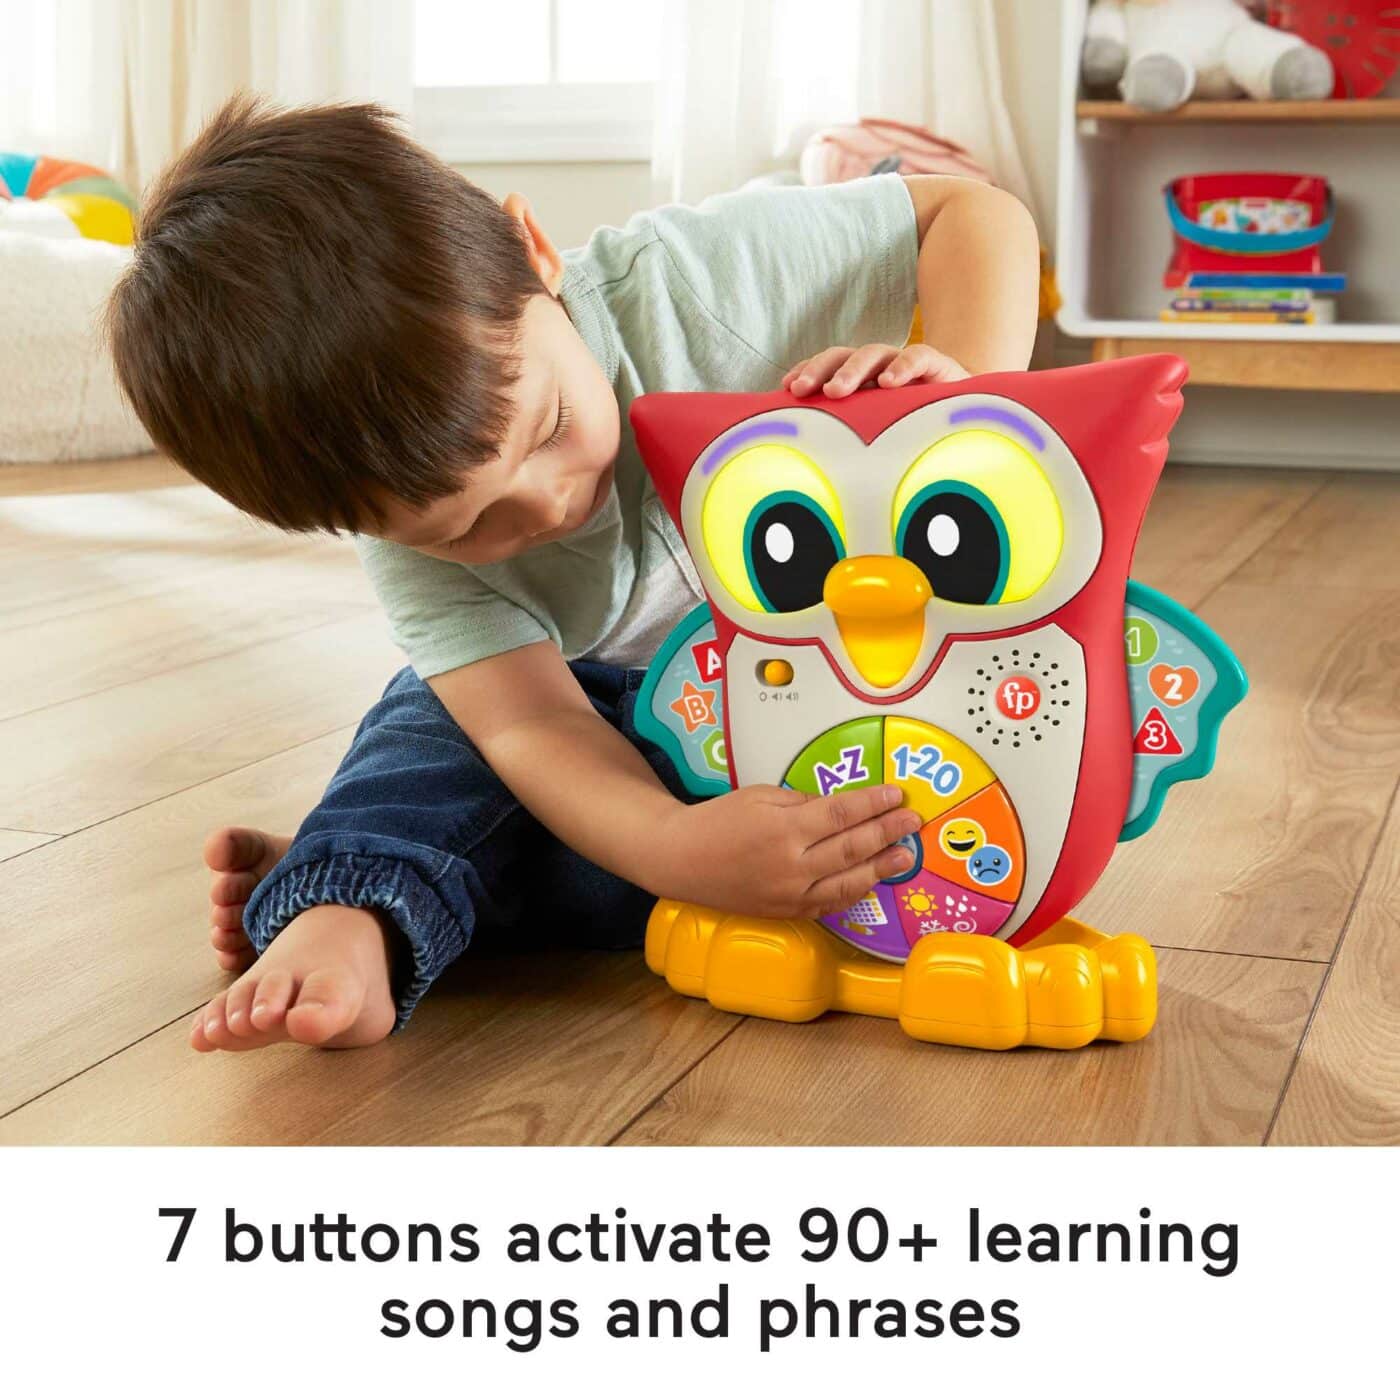 Fisher Price Linkimals Light-Up & Learn Owl